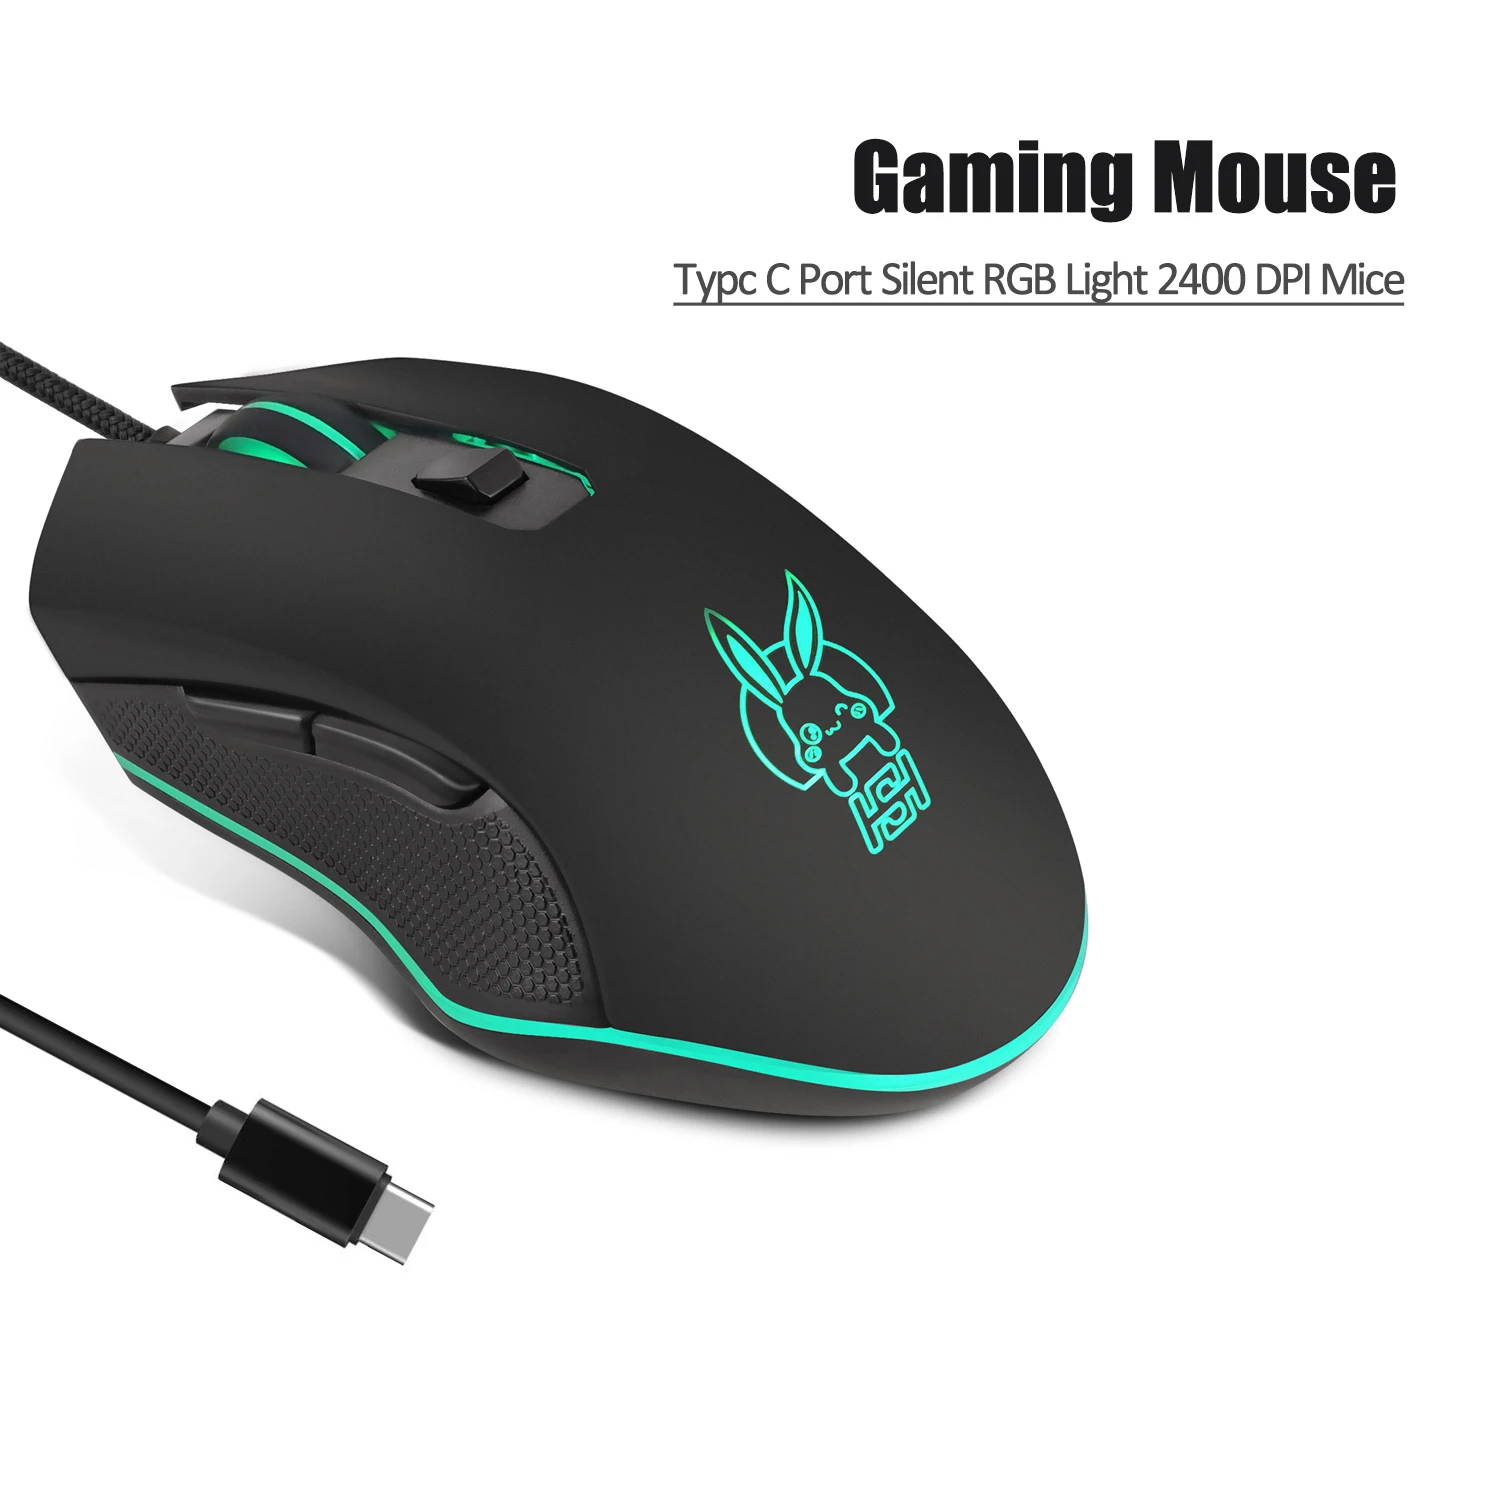 

Silent Gaming Mouse for Laptop Wired Mini RGB 2400 DPI 6 Buttons Typc C Port Portable Mause Optical USB Gamer Mice for Windows